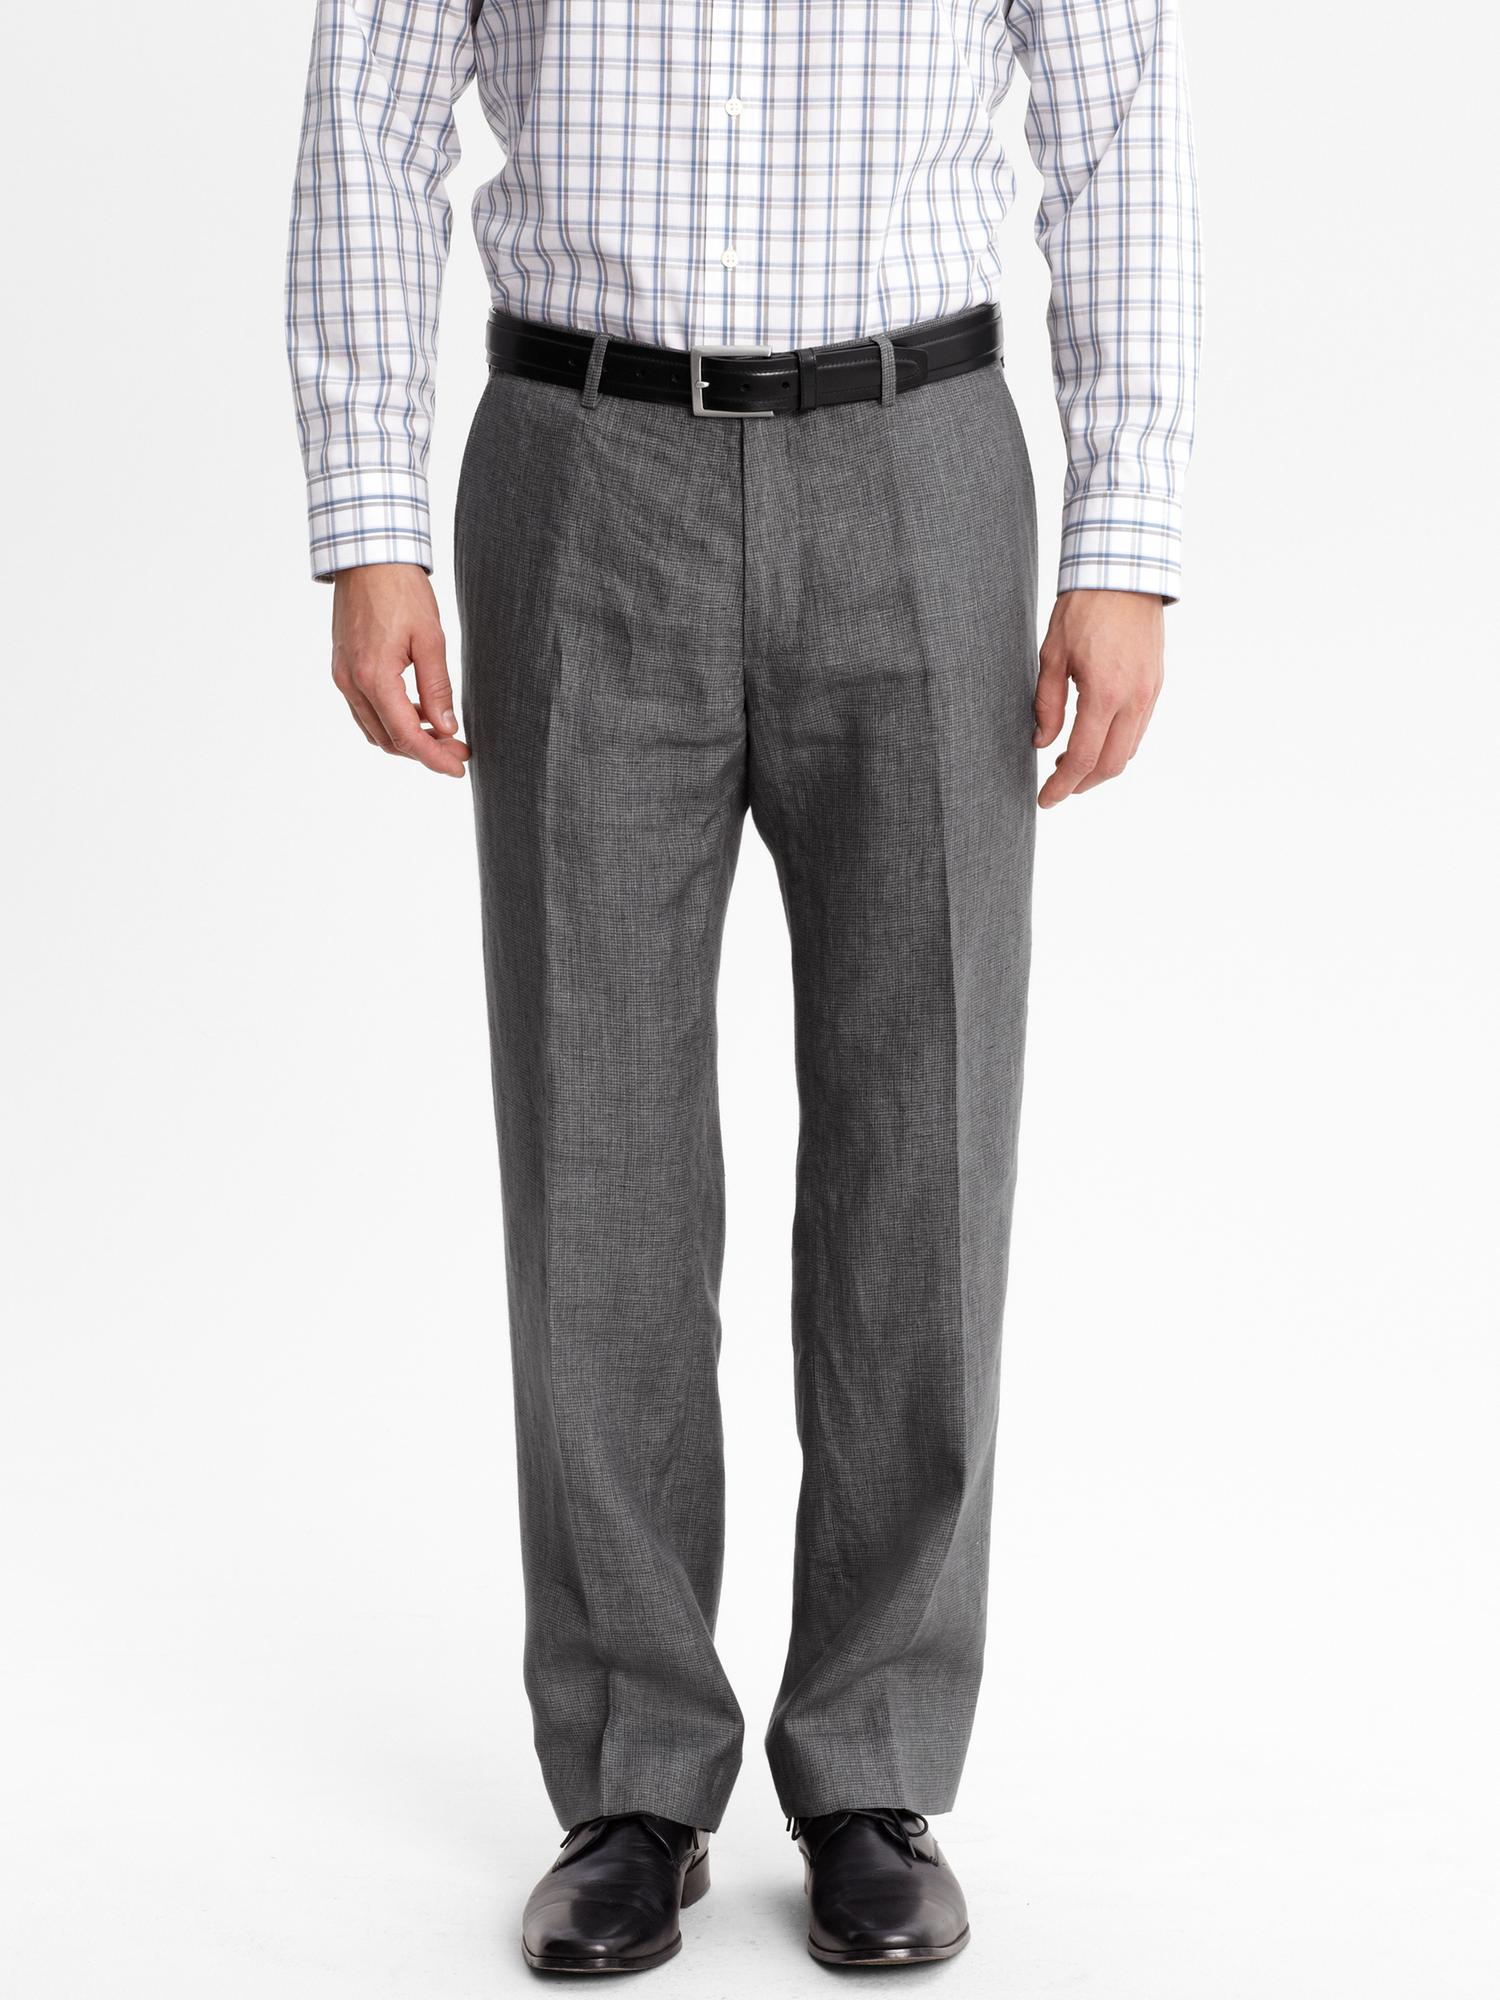 Classic fit houndstooth linen dress pant